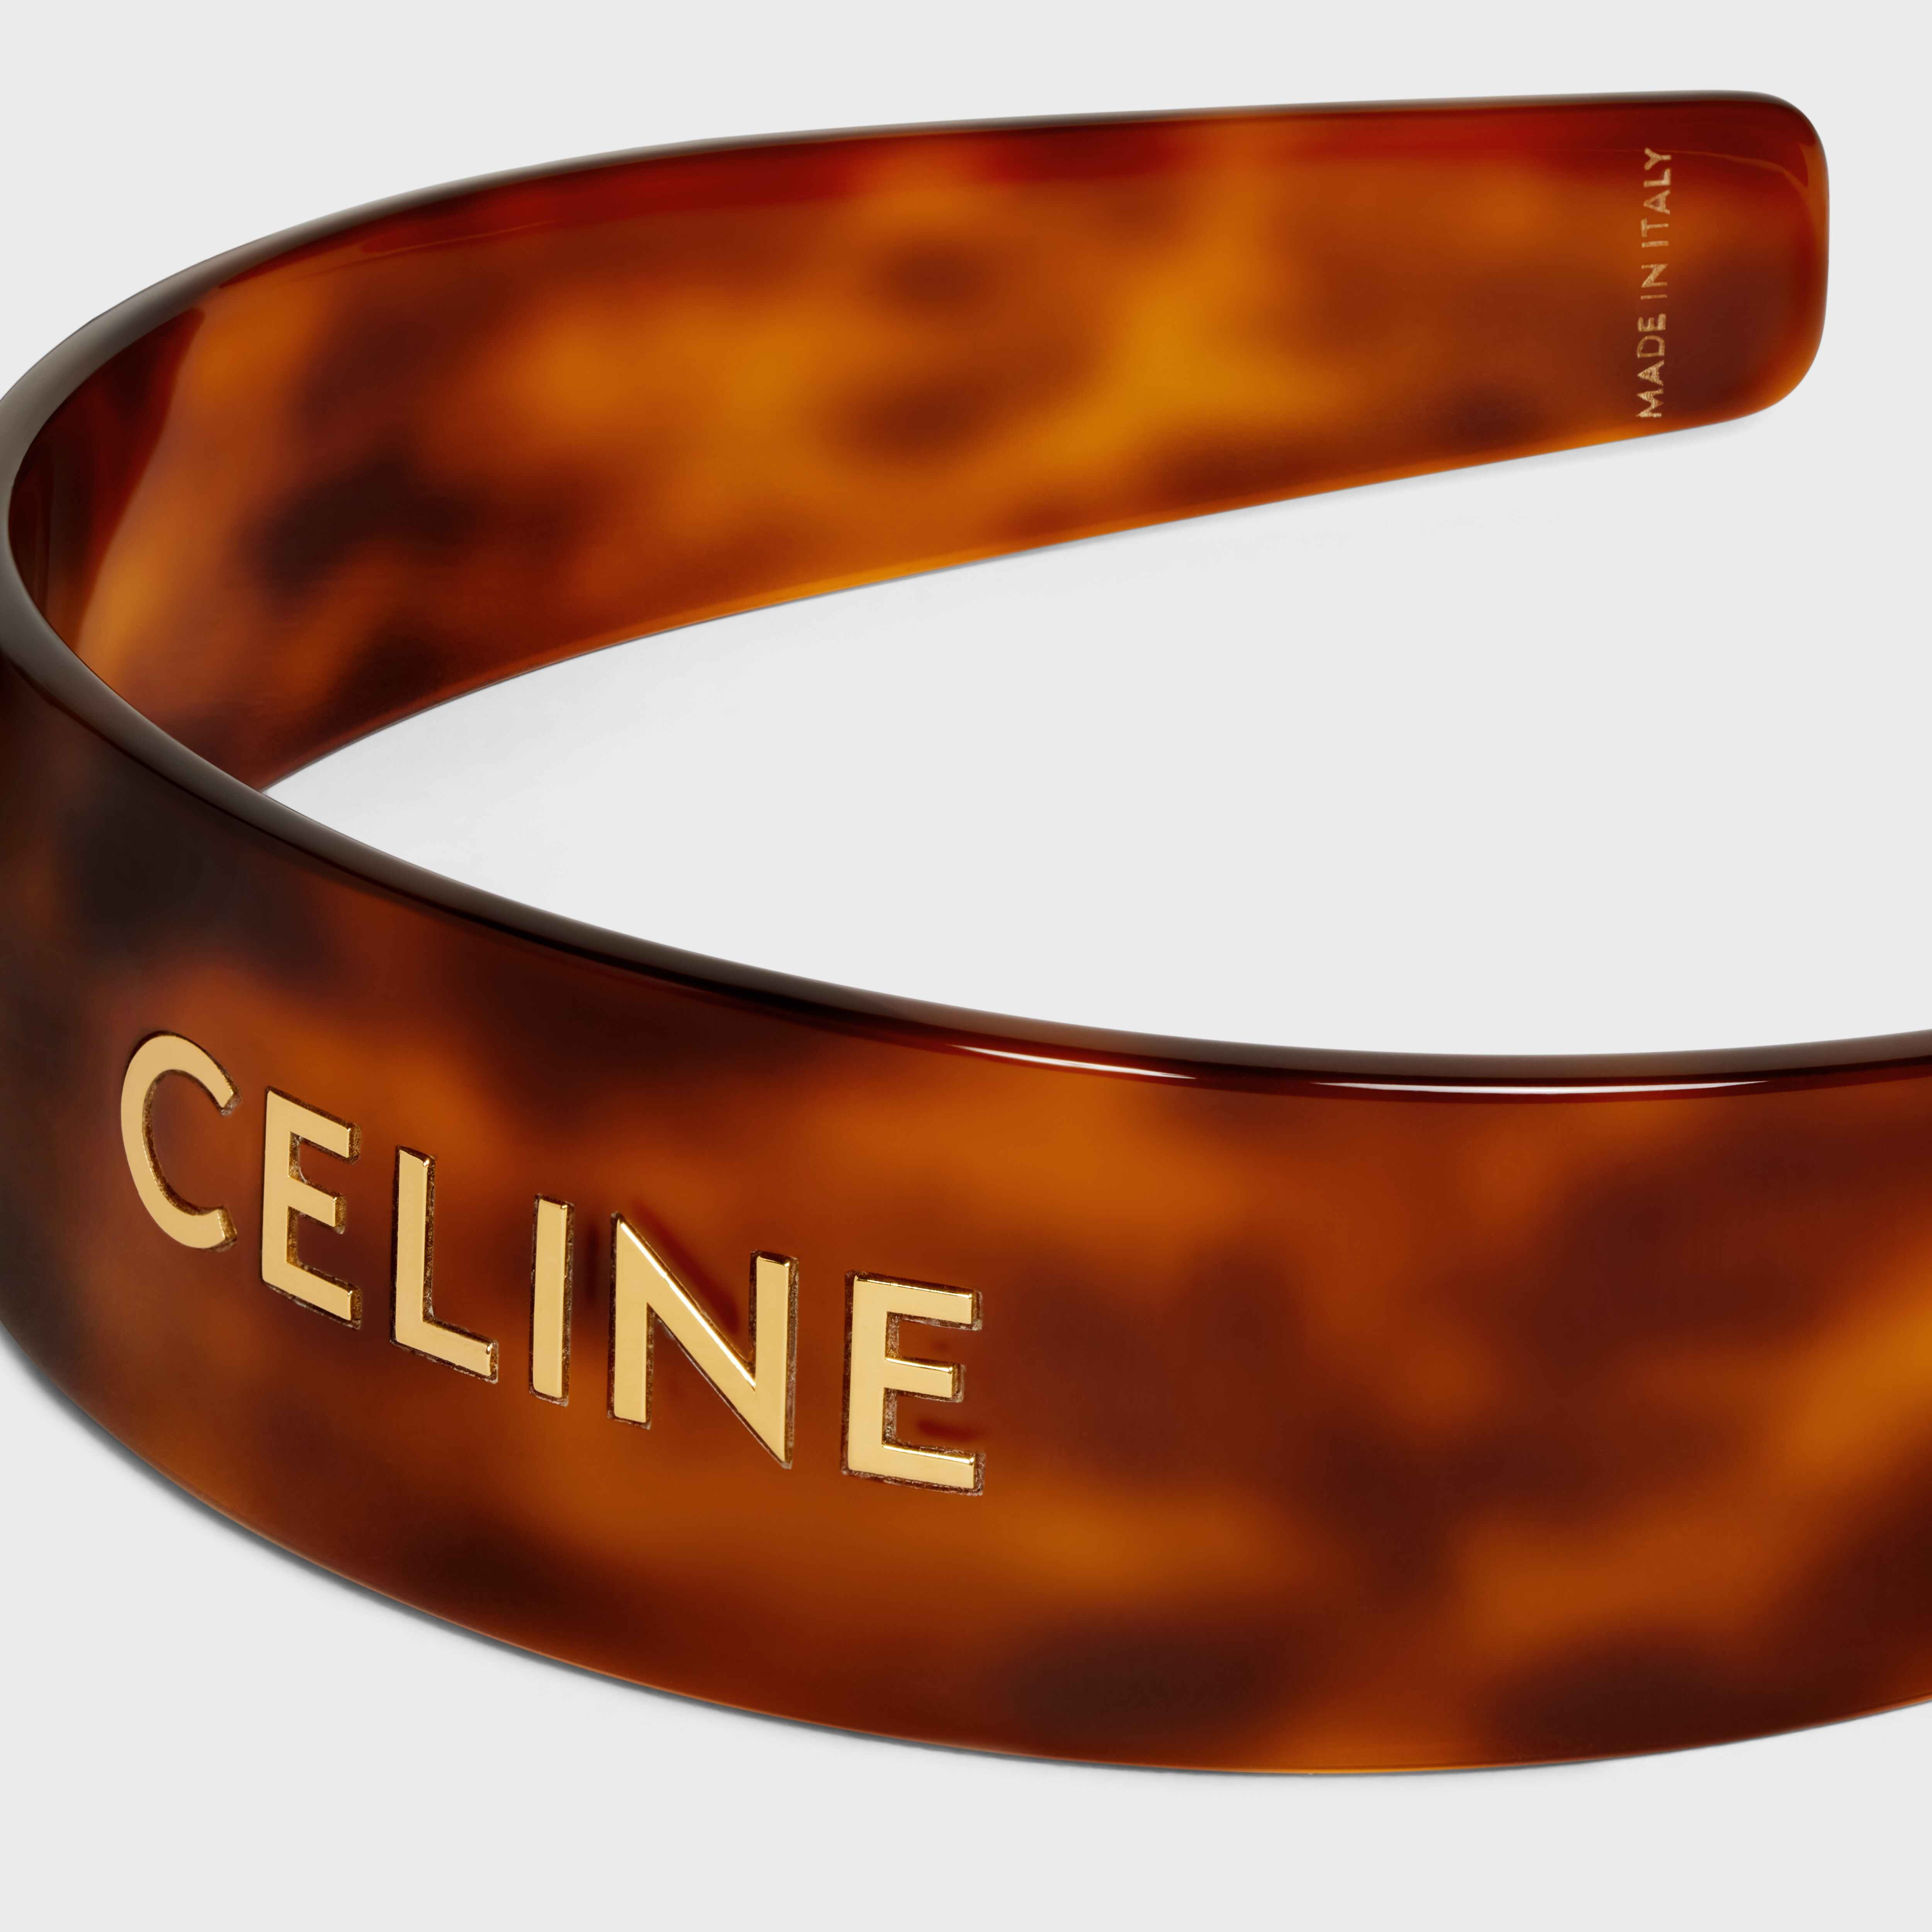 Celine Headband in Blond Havana Acetate and Brass with Gold finish - 3